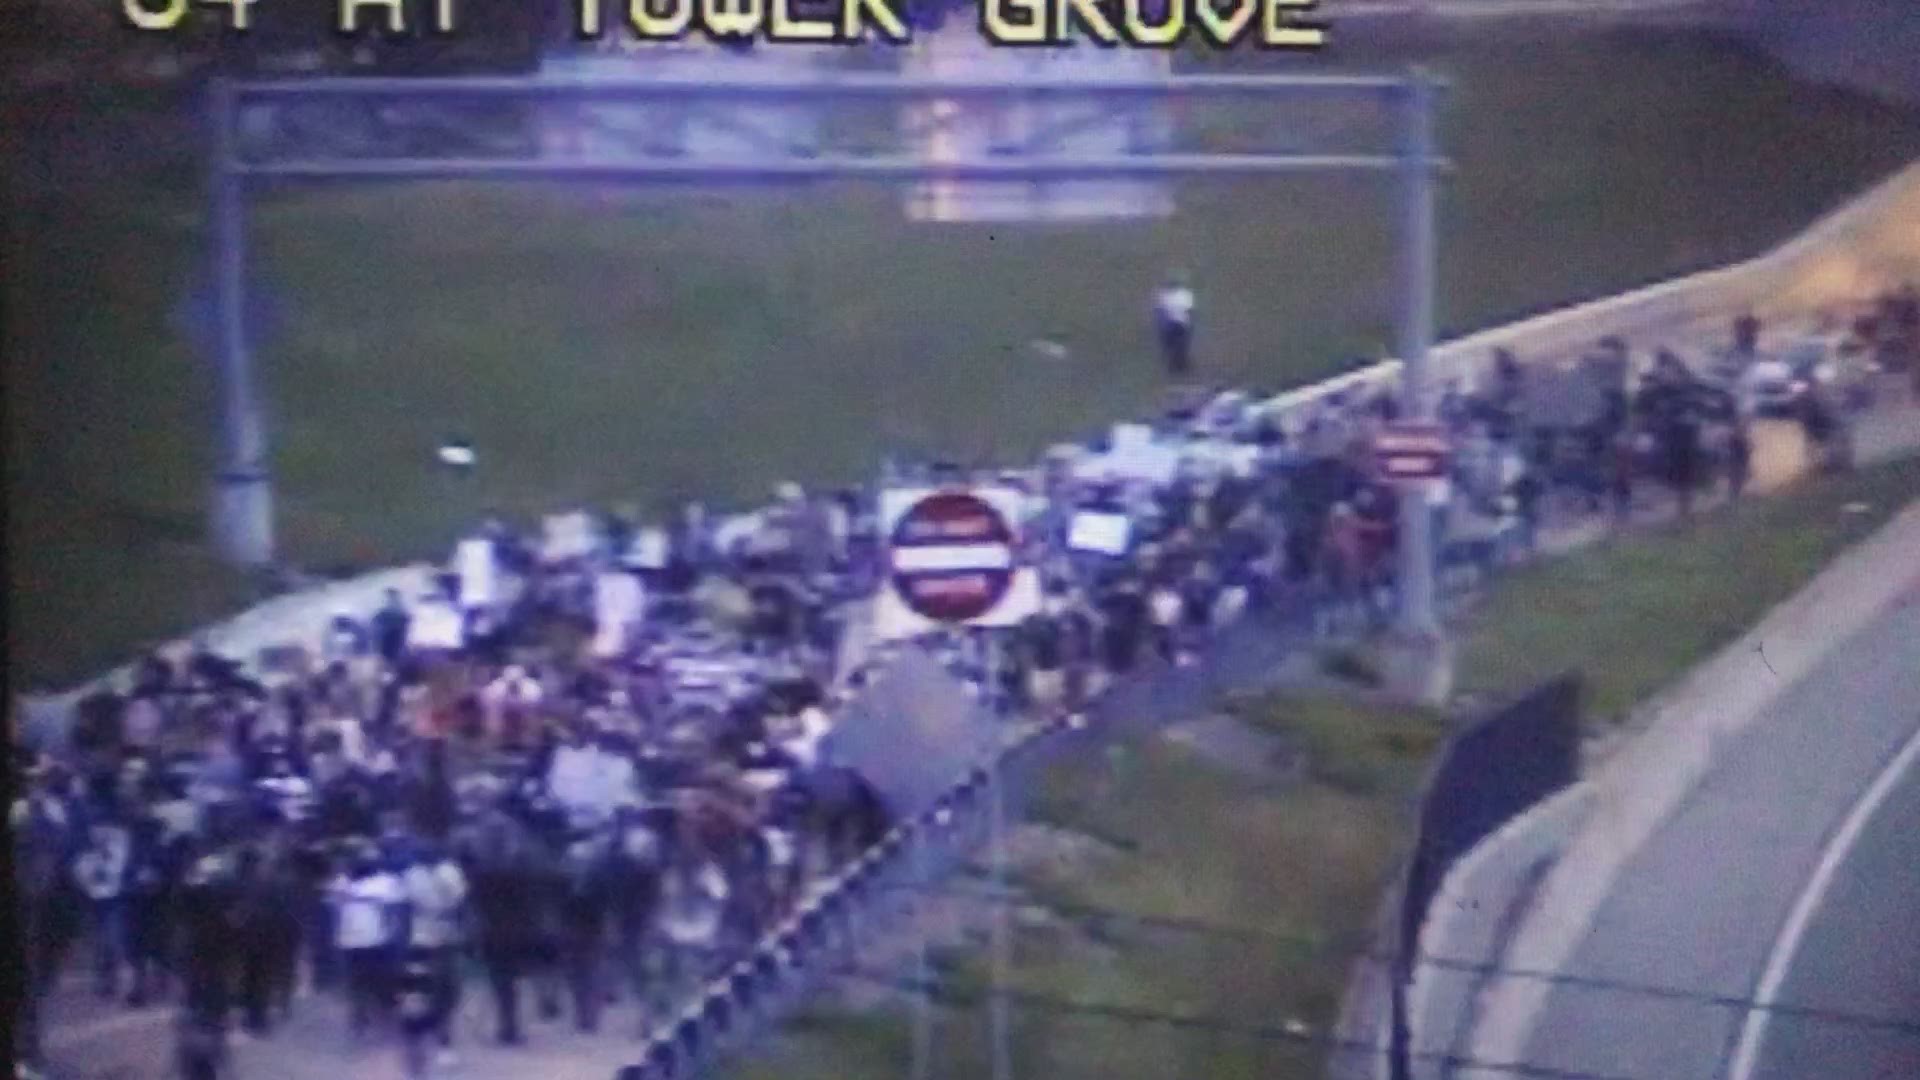 Protesters can be seen marching on I-64 from a traffic camera